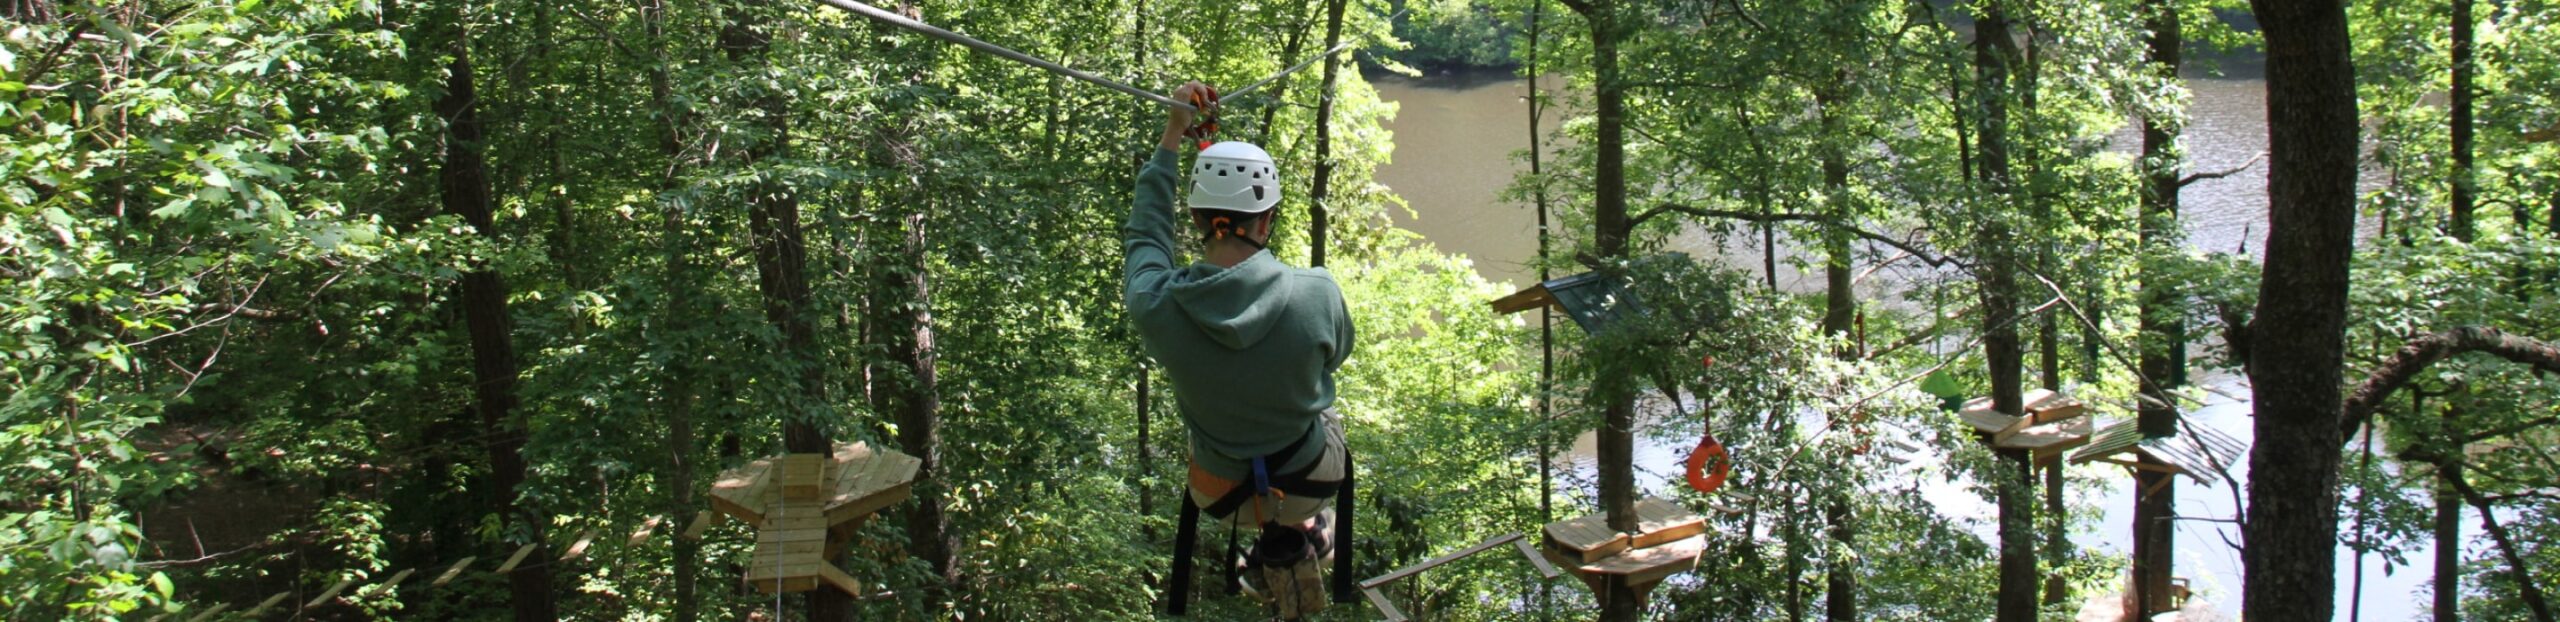 man ziplining through canopy and aerial adventure course